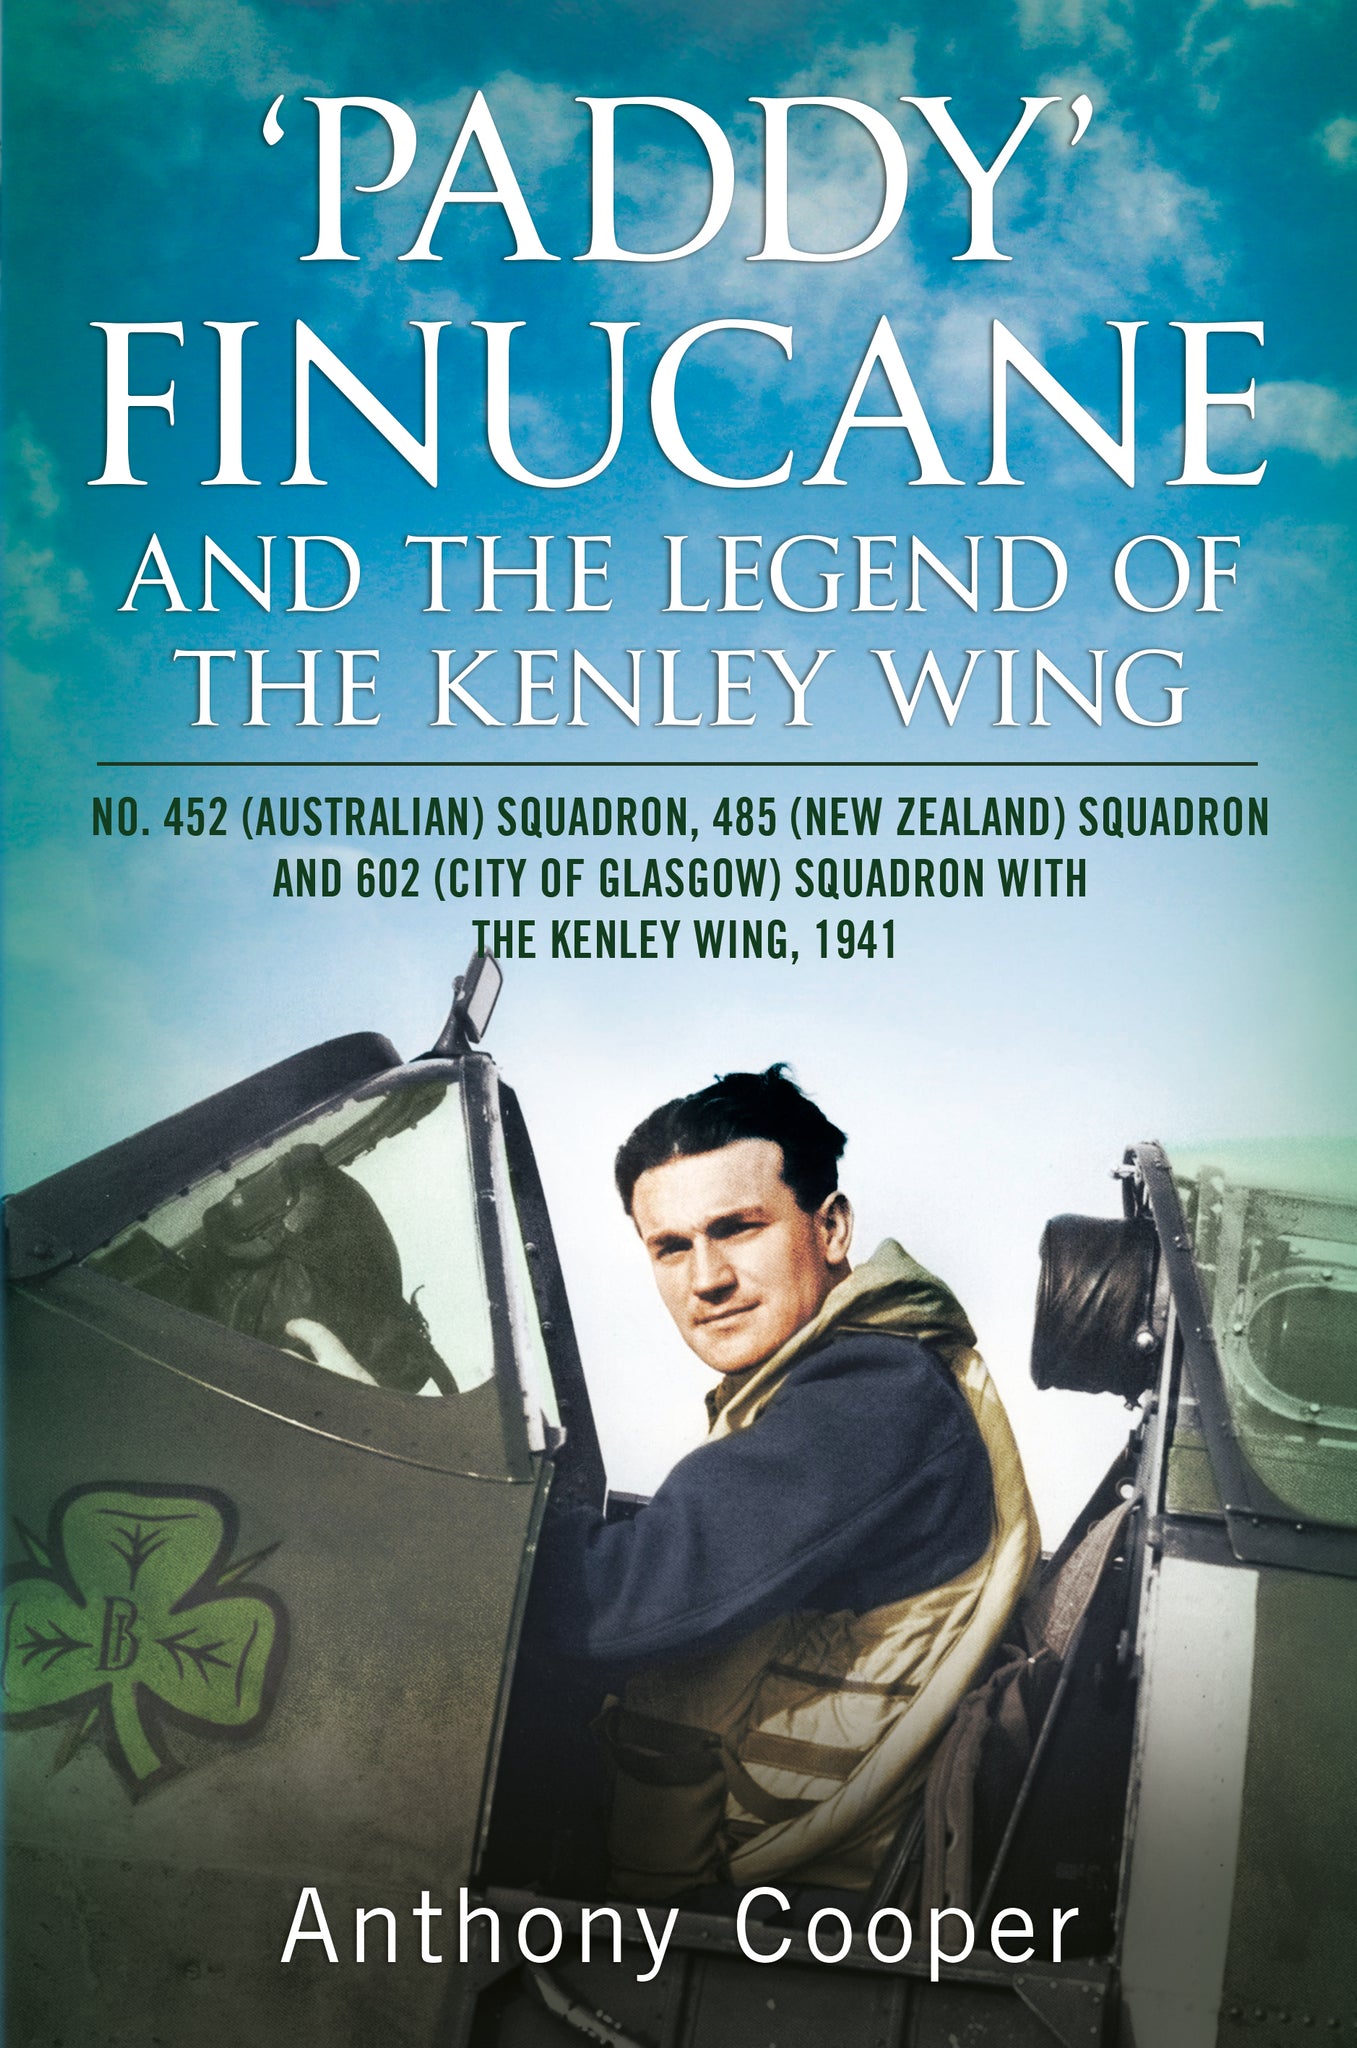 ‘Paddy’ Finucane and the Legend of the Kenley Wing